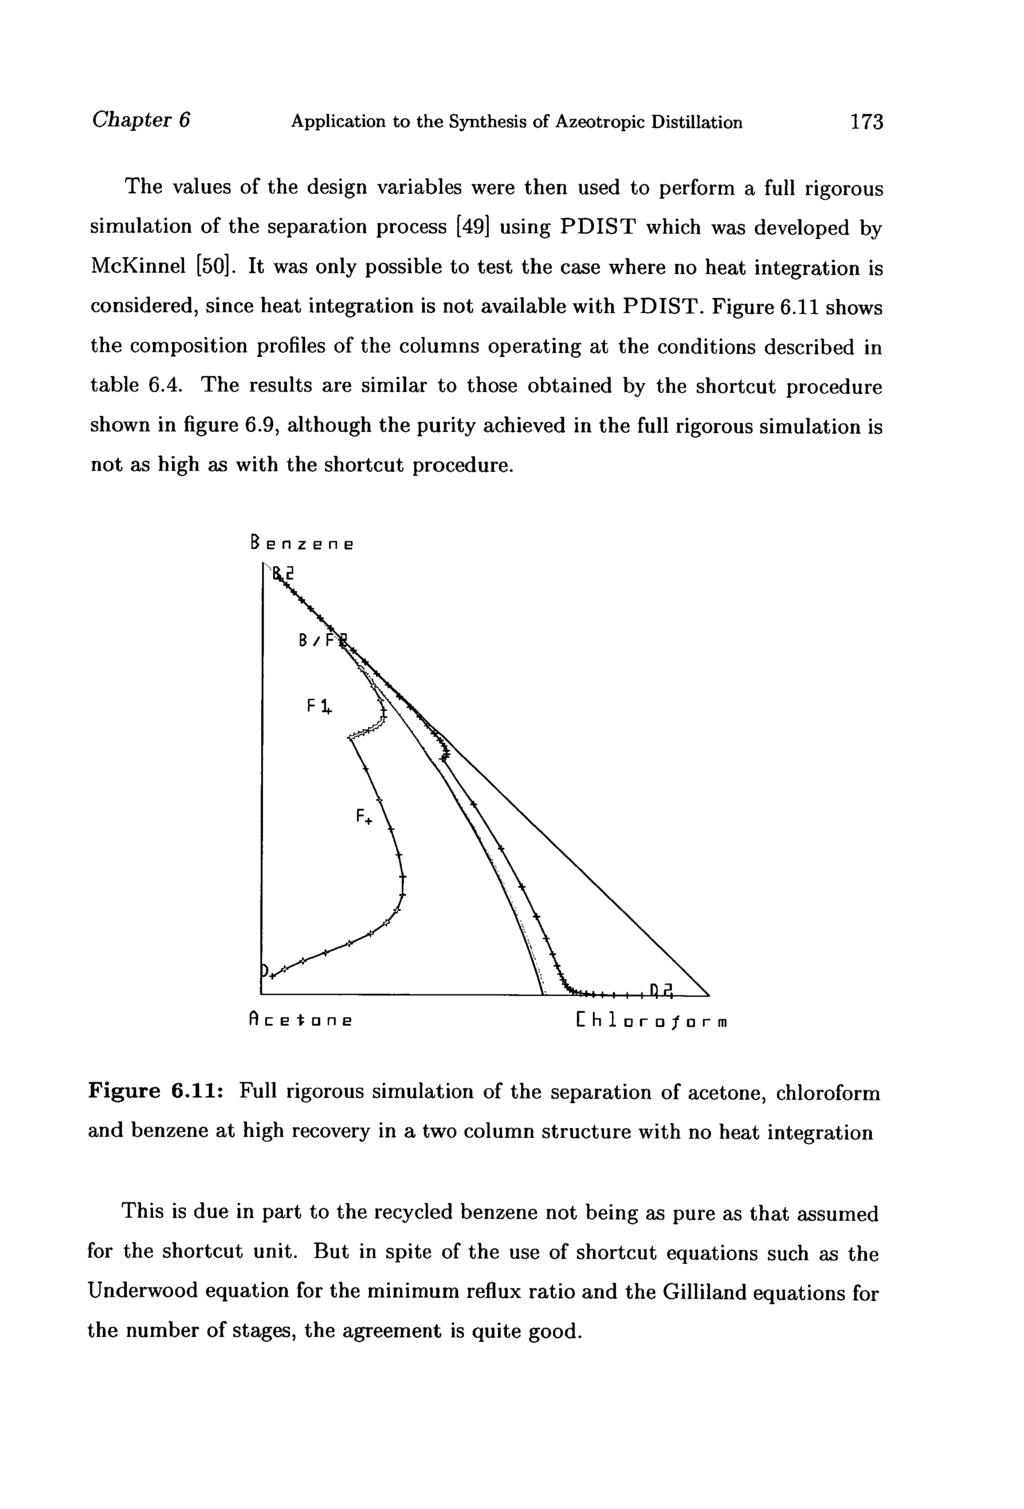 Chapter 6 Application to the Synthesis of Azeotropic Distillation 173 The values of the design variables were then used to perform a full rigorous simulation of the separation process [49] using